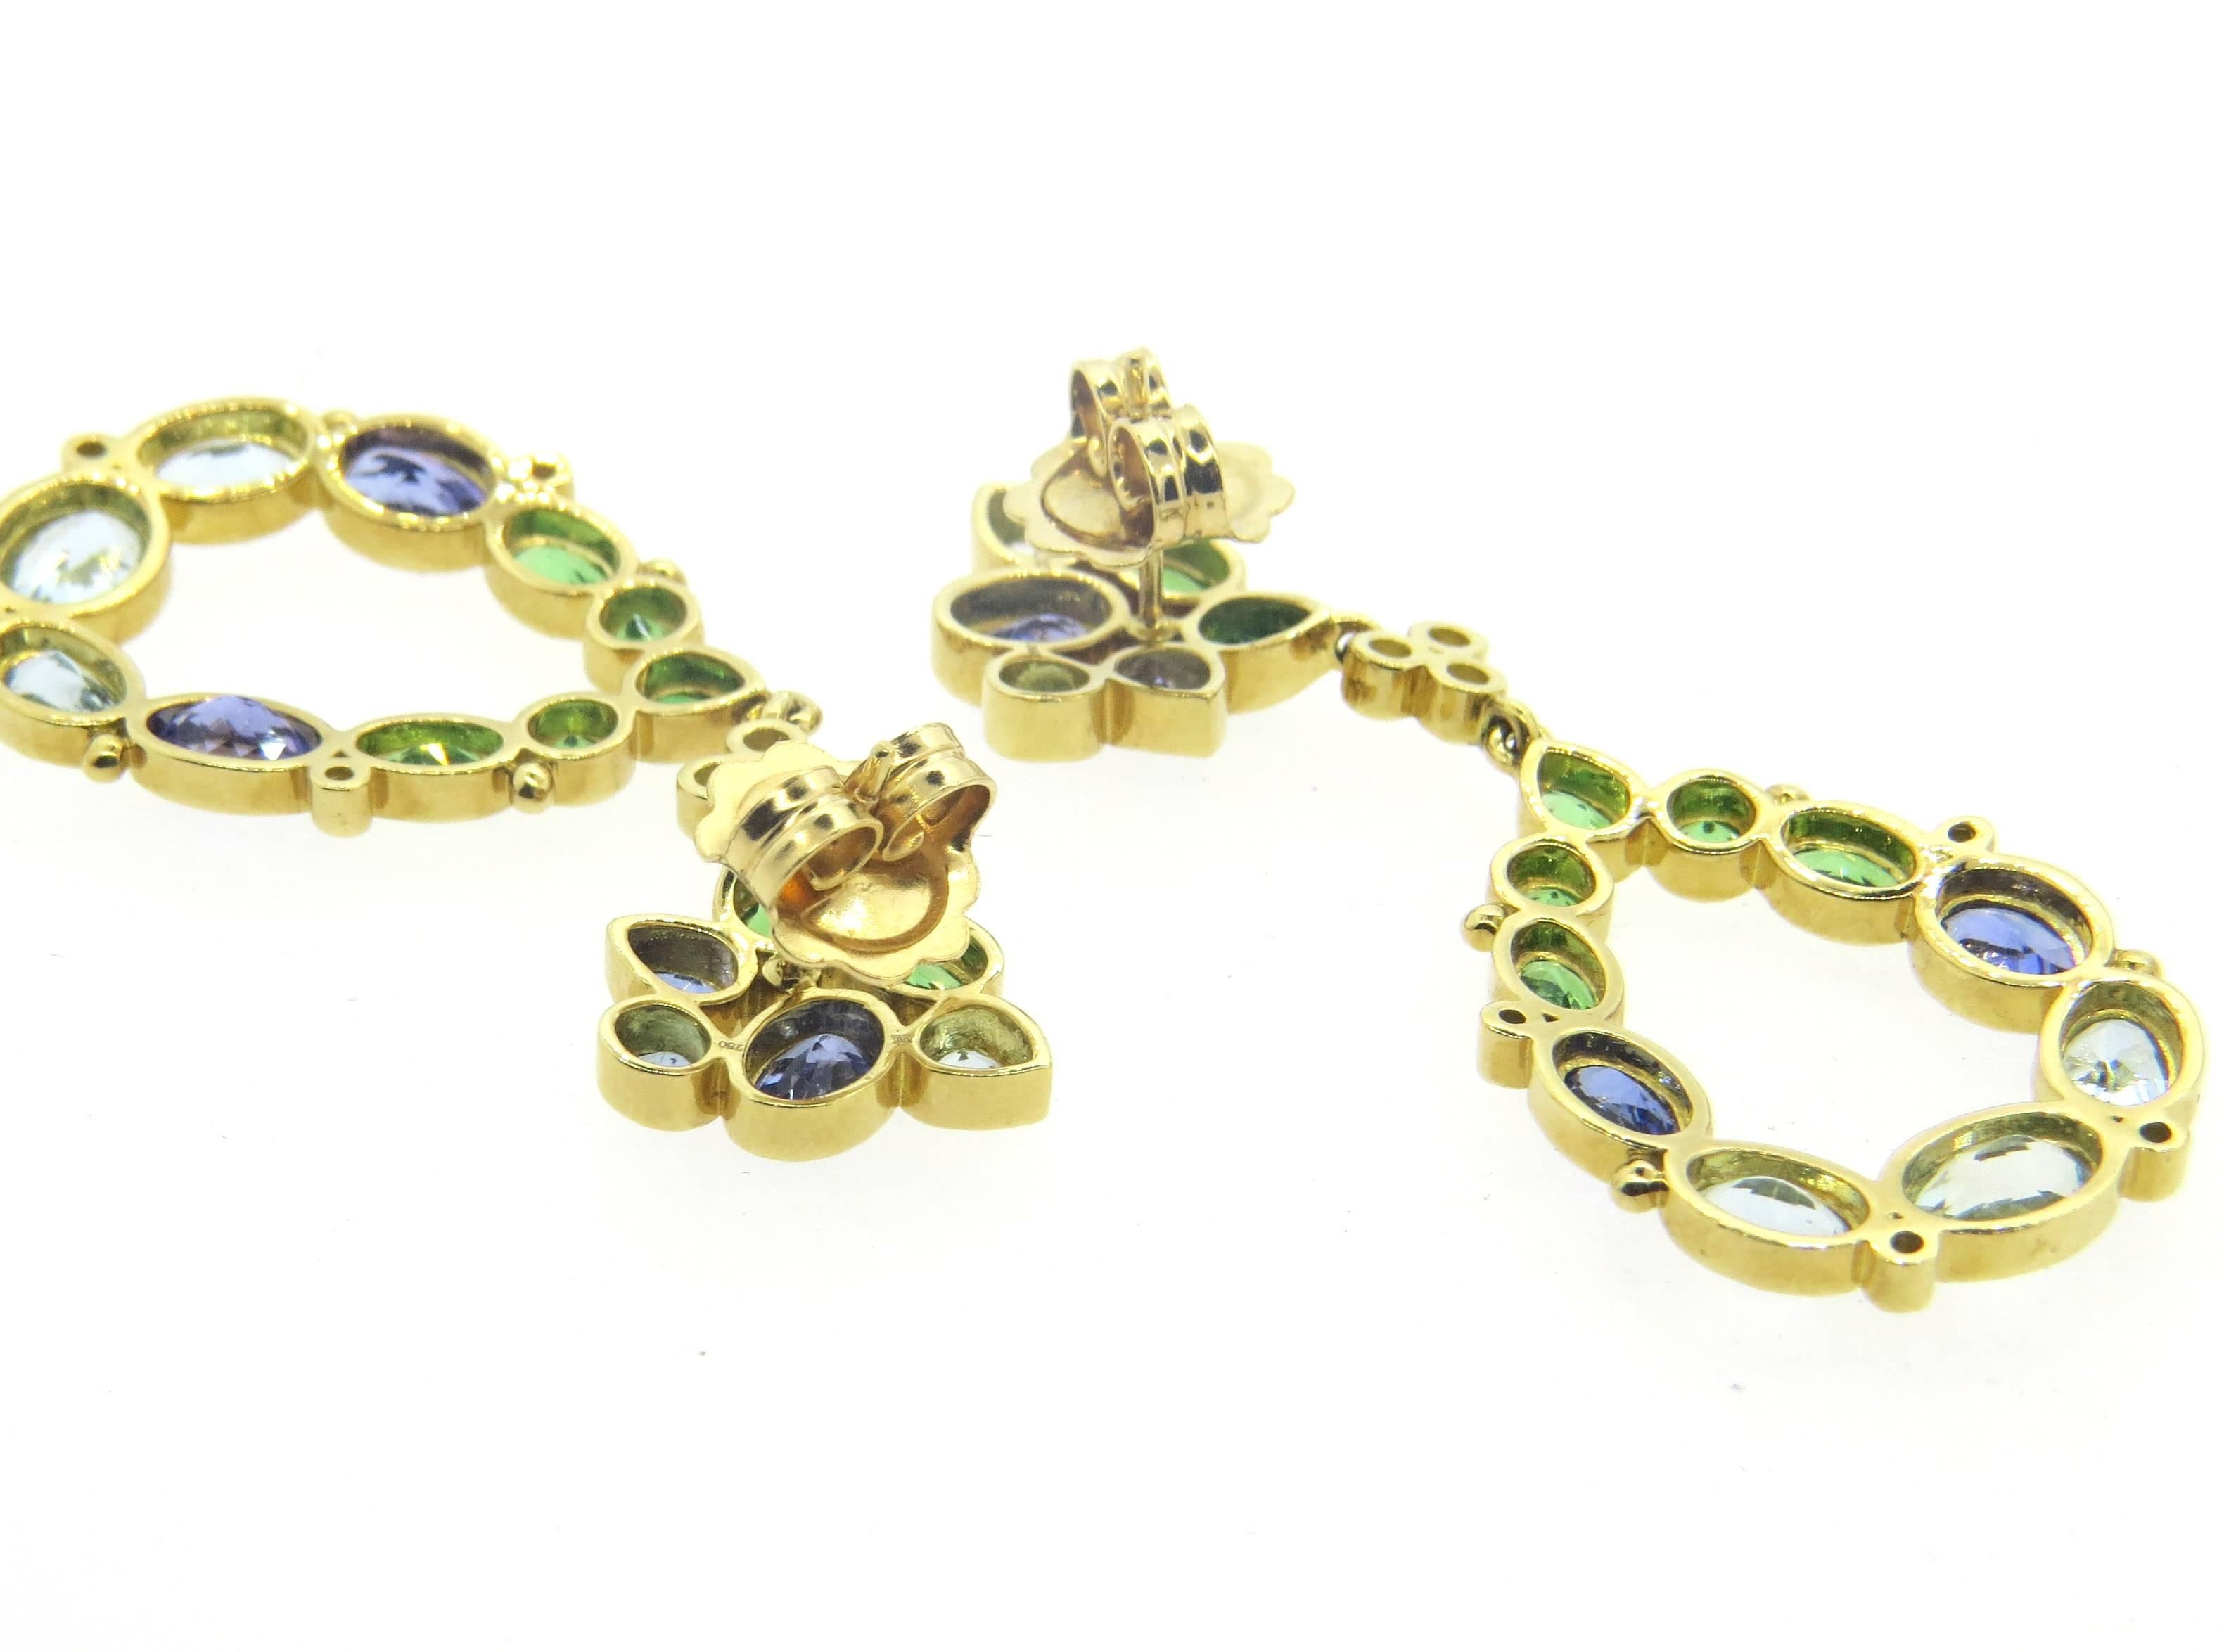 A pair of new 18k yellow gold drop earrings, crafted by Temple St. Clair for Anima collection, featuring 0.28ctw in diamonds, tsavorite garnets, tanzanites and aquamarine gemstones. Earrings are 52mm long x 21mm at widest points. Marked with 750 and